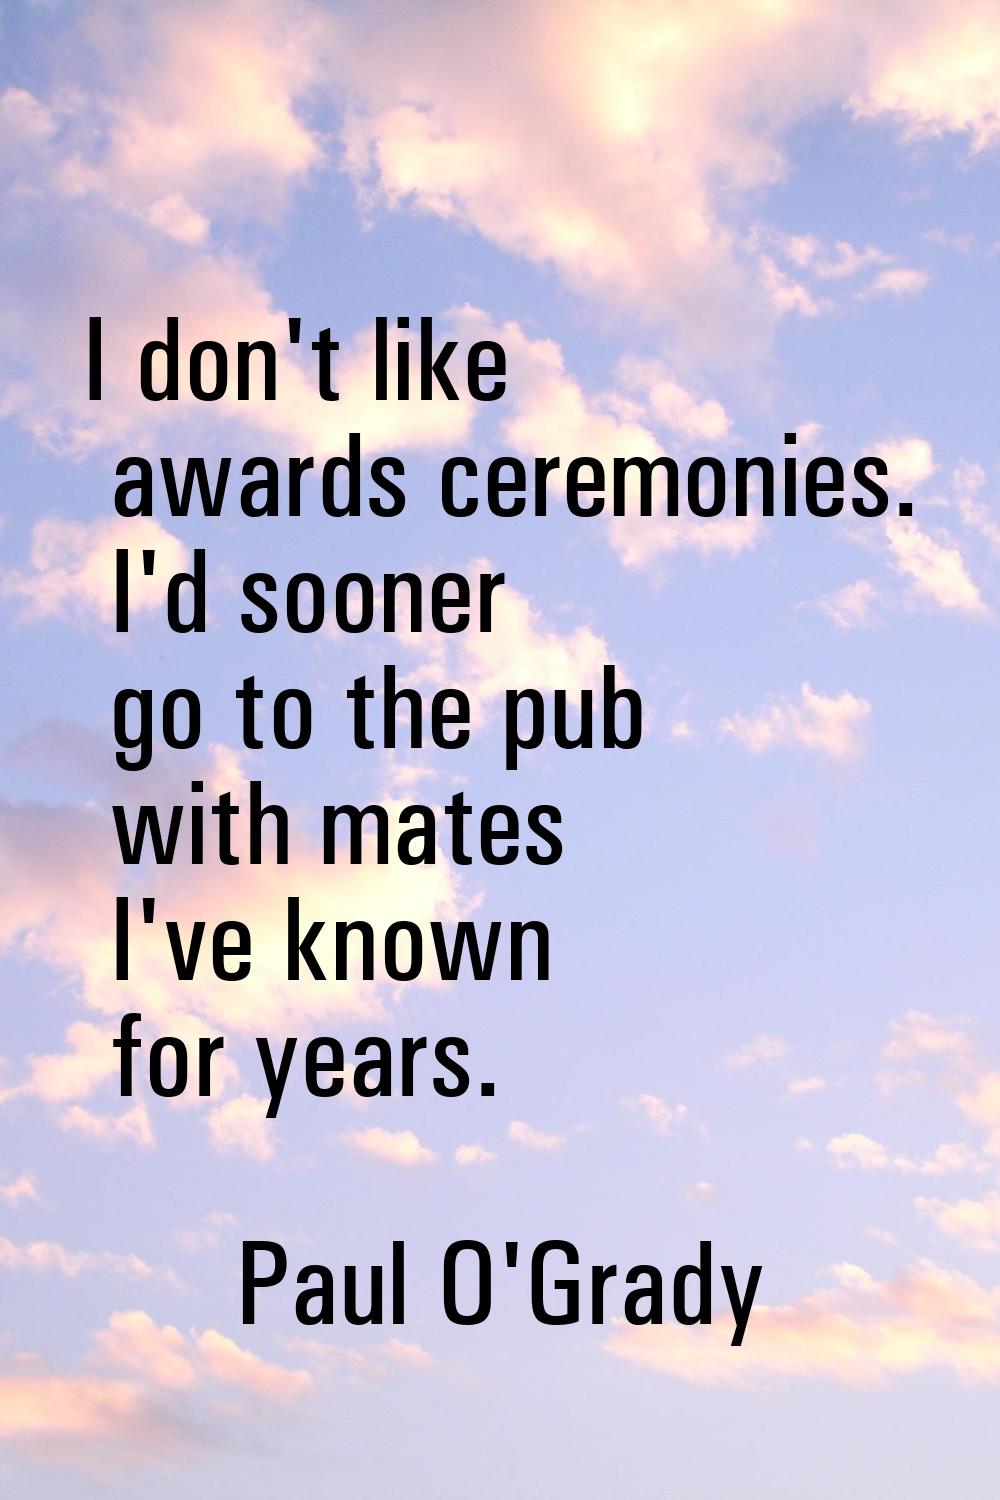 I don't like awards ceremonies. I'd sooner go to the pub with mates I've known for years.